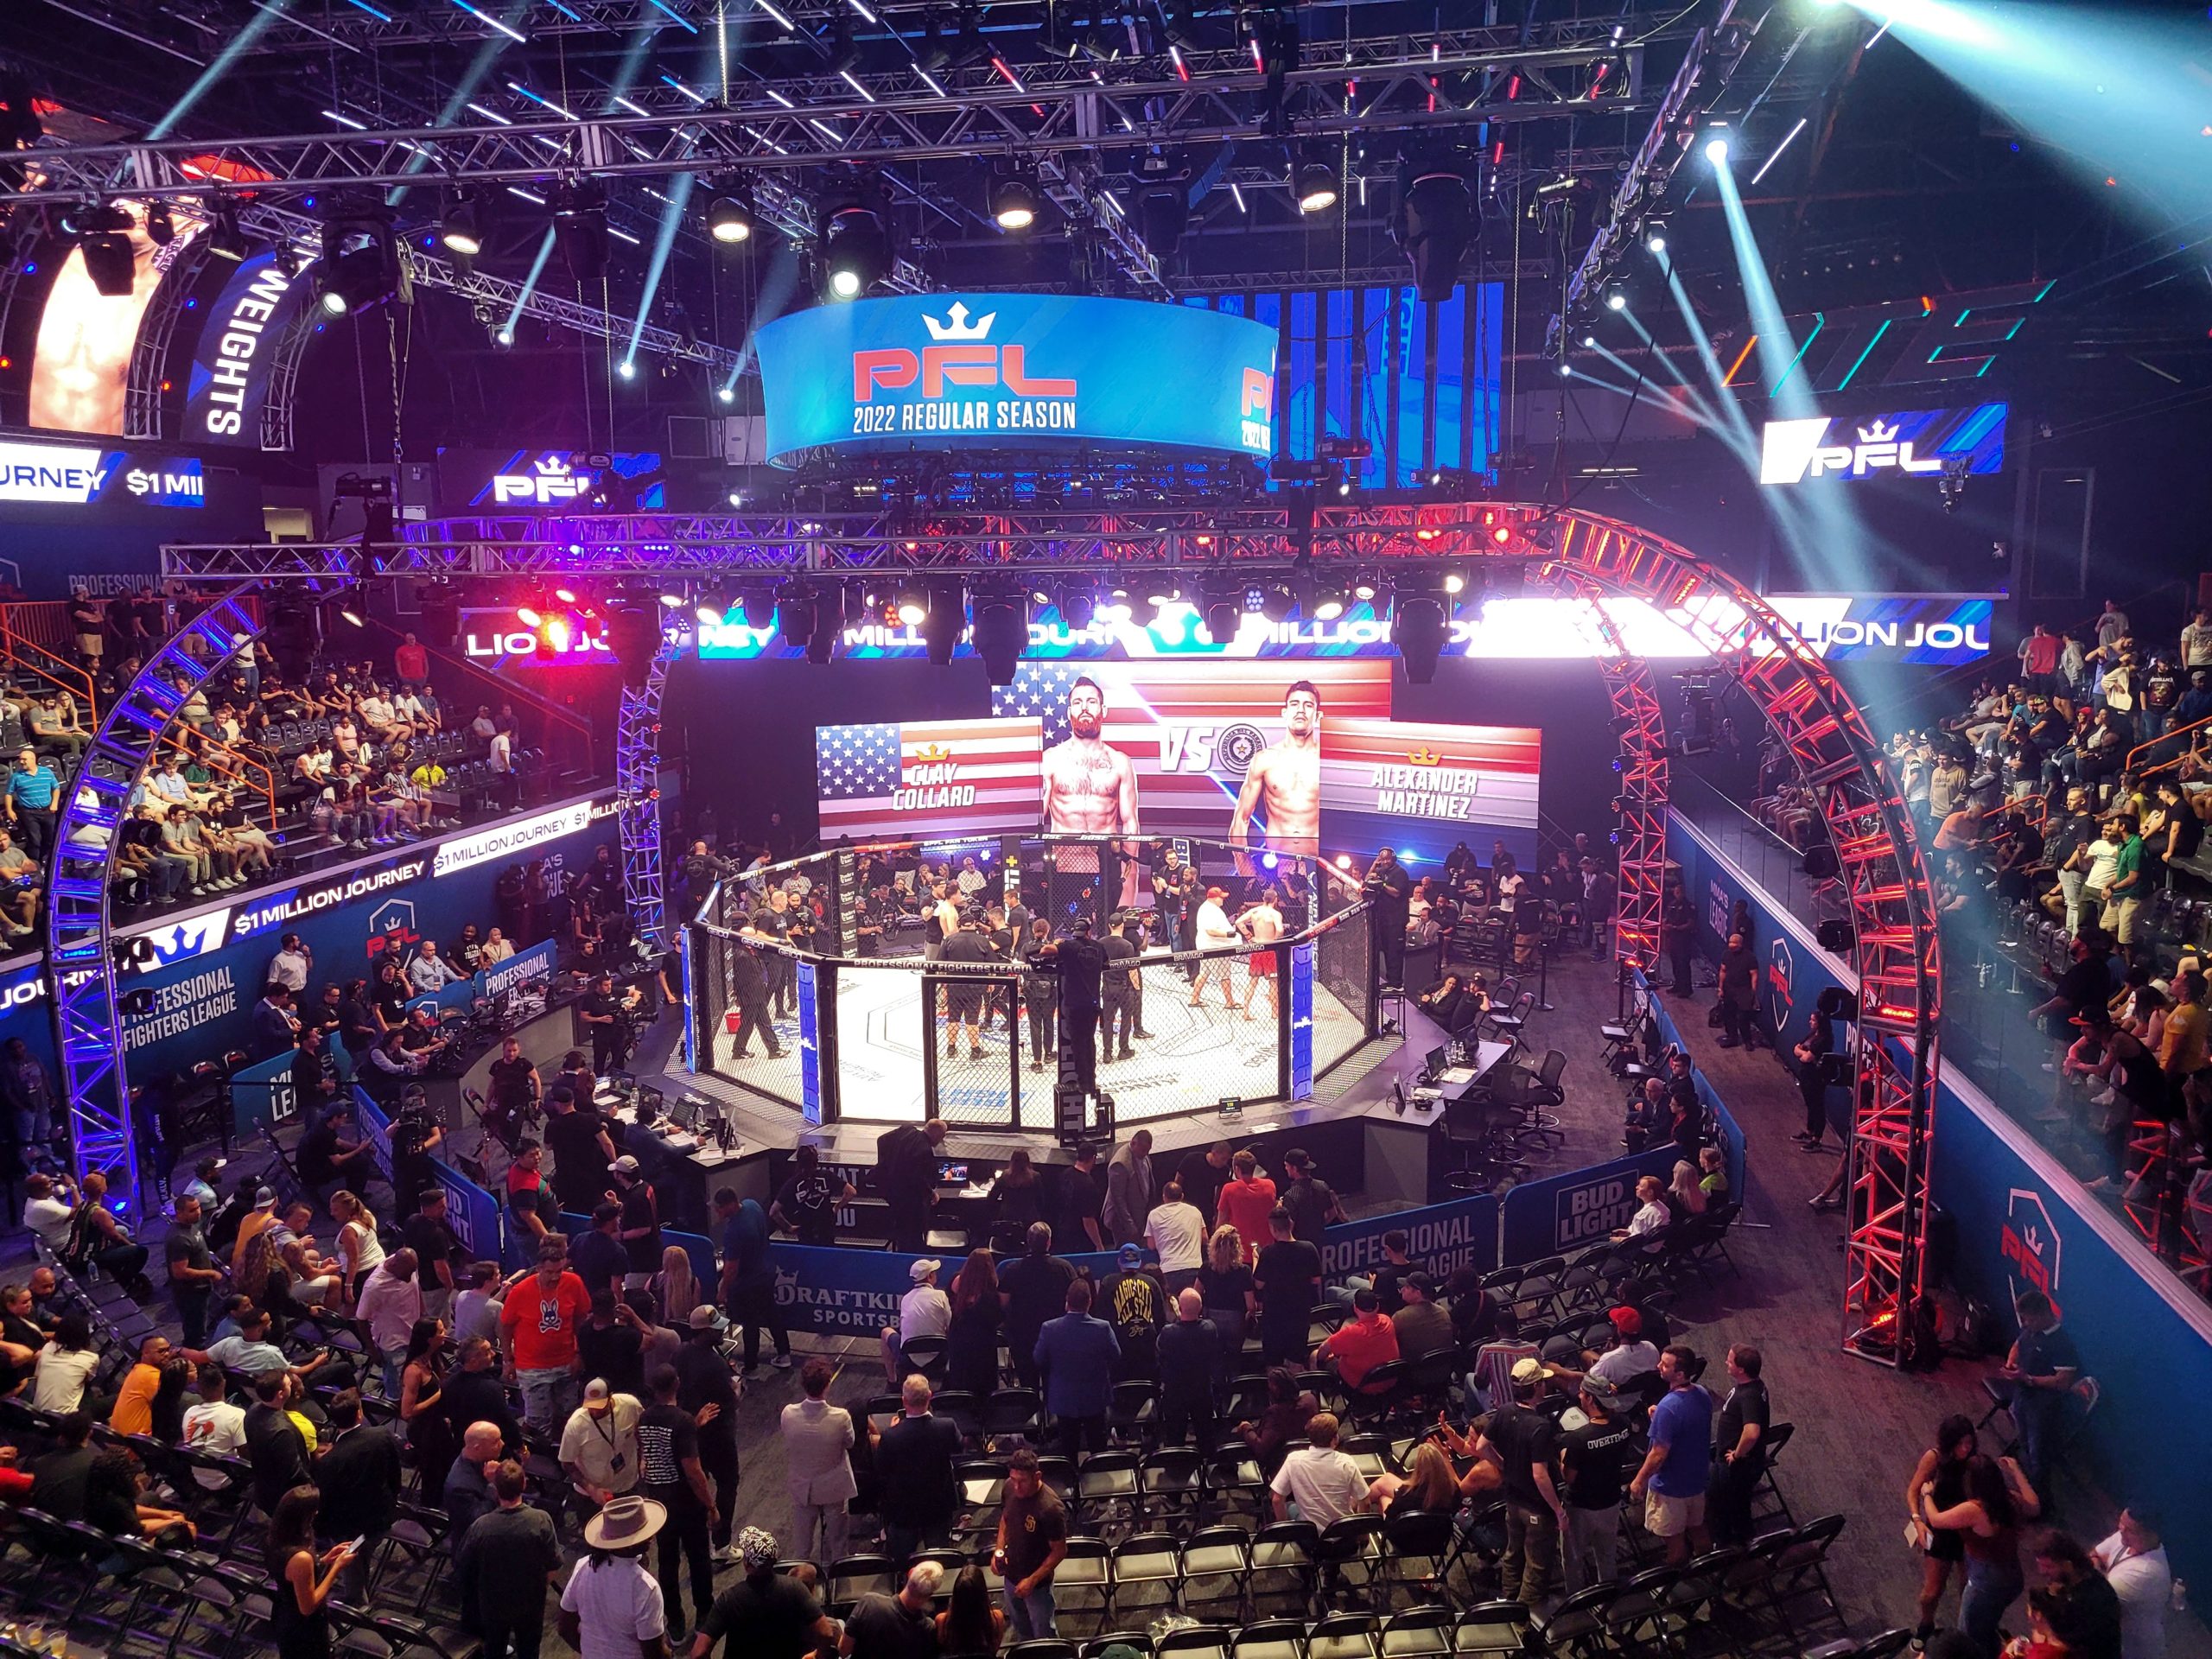 Professional Fighters League (PFL) Second Regular Season Event Gets the  Green Light after Fighters Weigh in at the Iconic Chicago Theatre